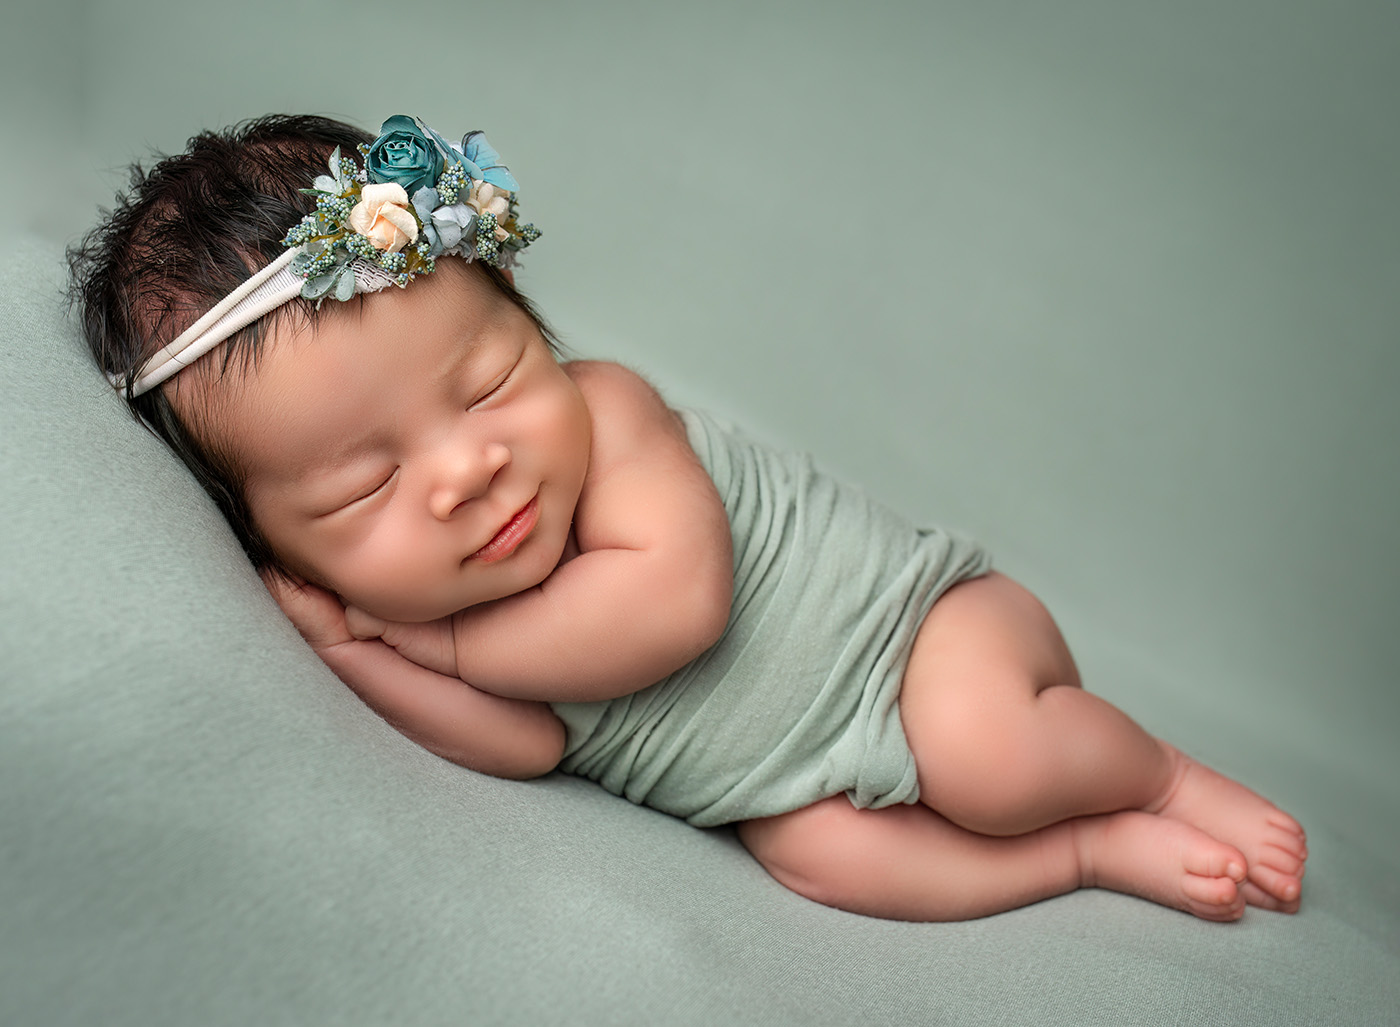 Luxury Newborn Photographer baby sleeping on her side and smiling on green background